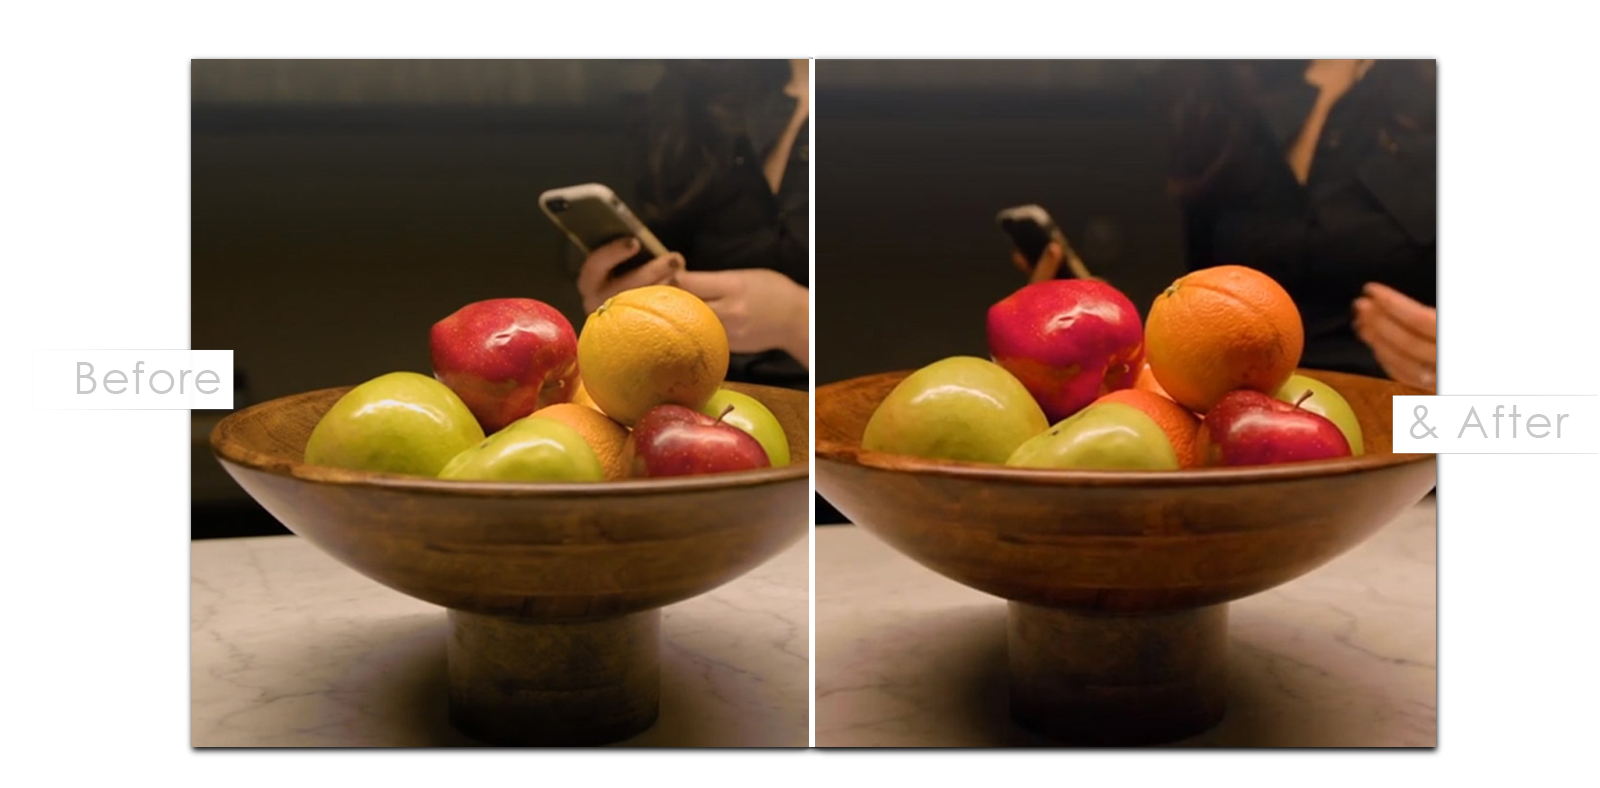 Before And After Pictures of Fruits Using Ketra Lighting